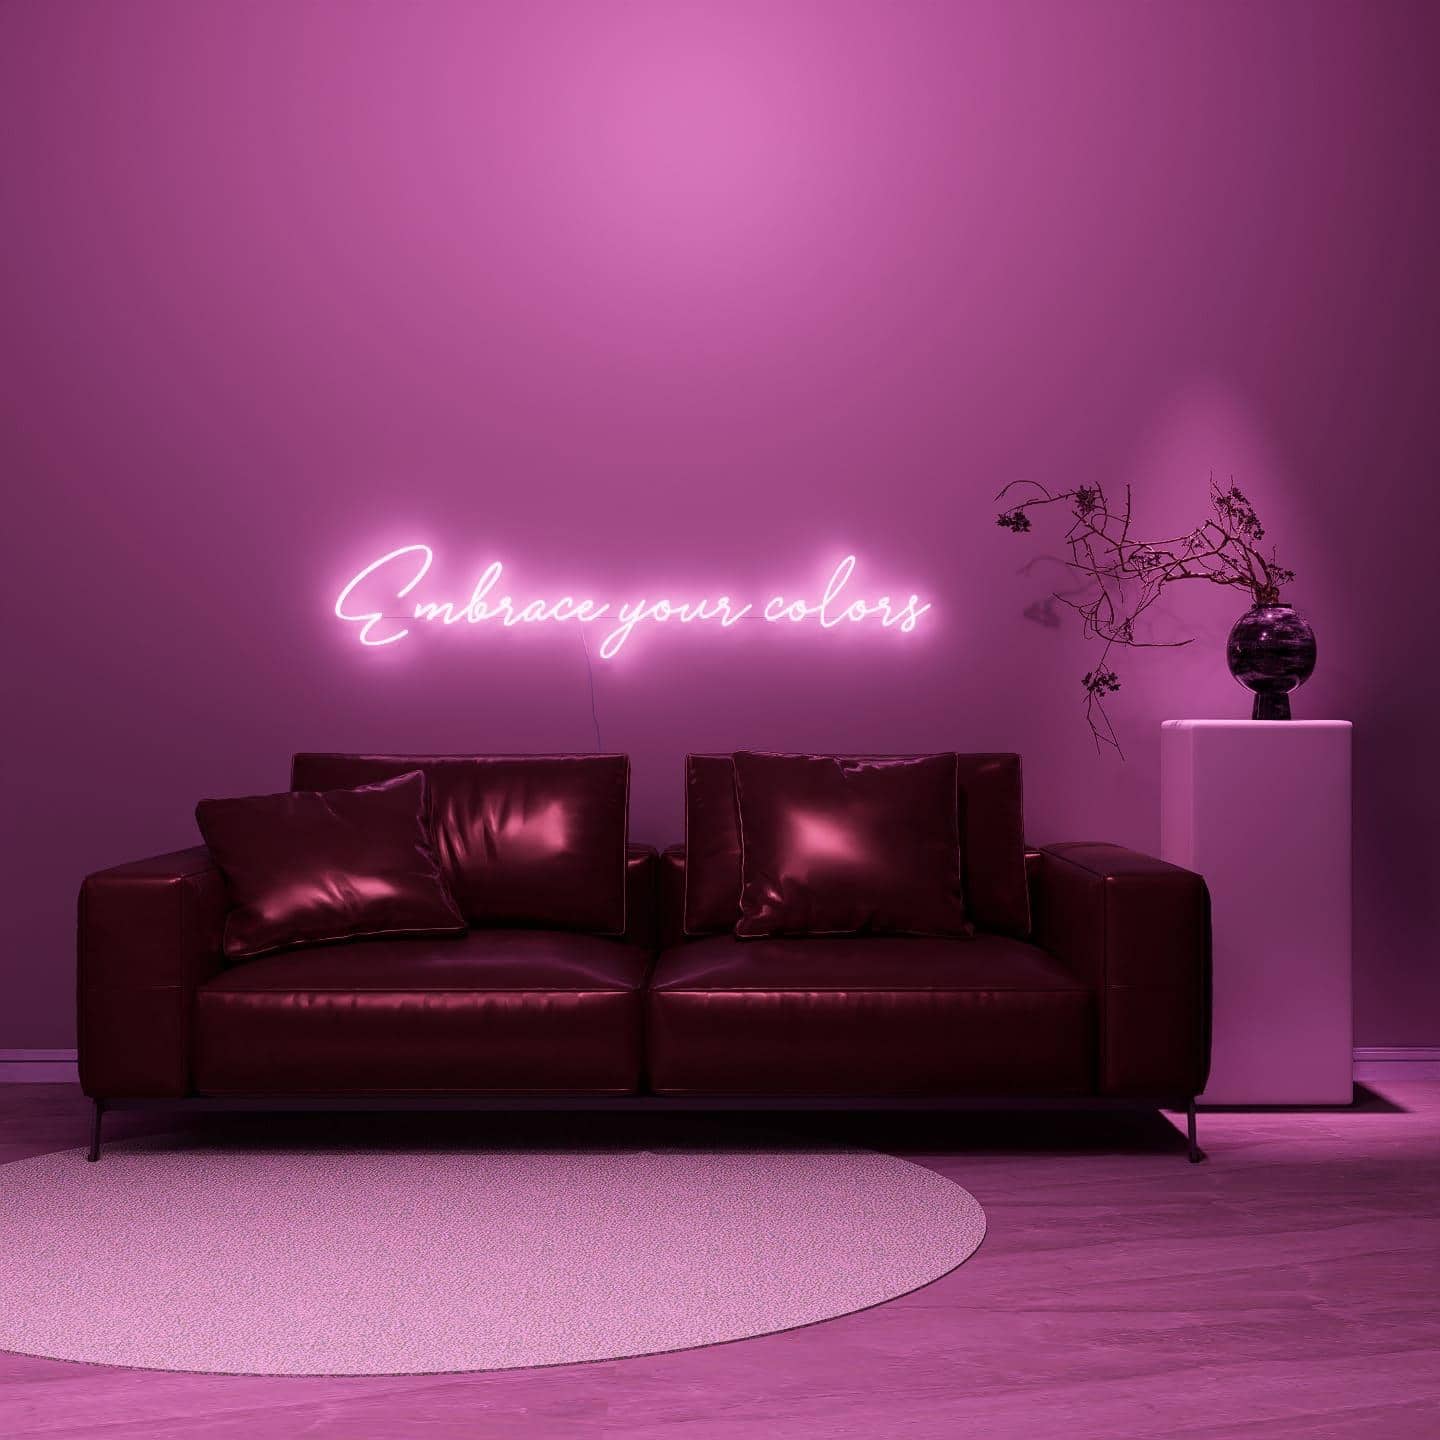 dark-night-lit-pink-neon-lights-hanging-on-the-wall-for-display-embrace-your-colors